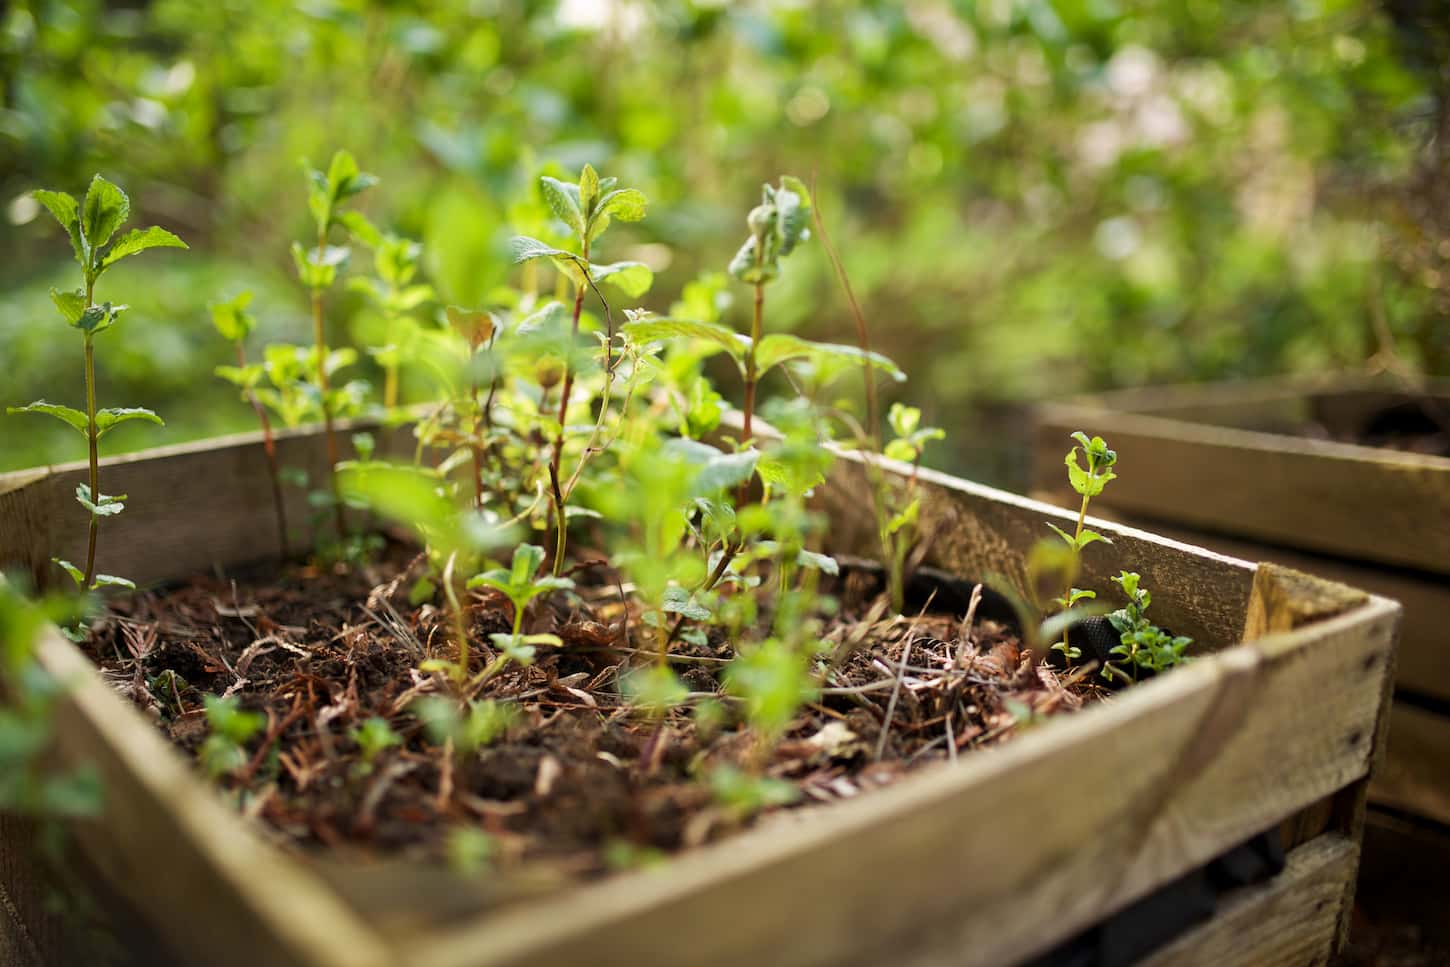 An image of mint plants growing in raised bed garden.